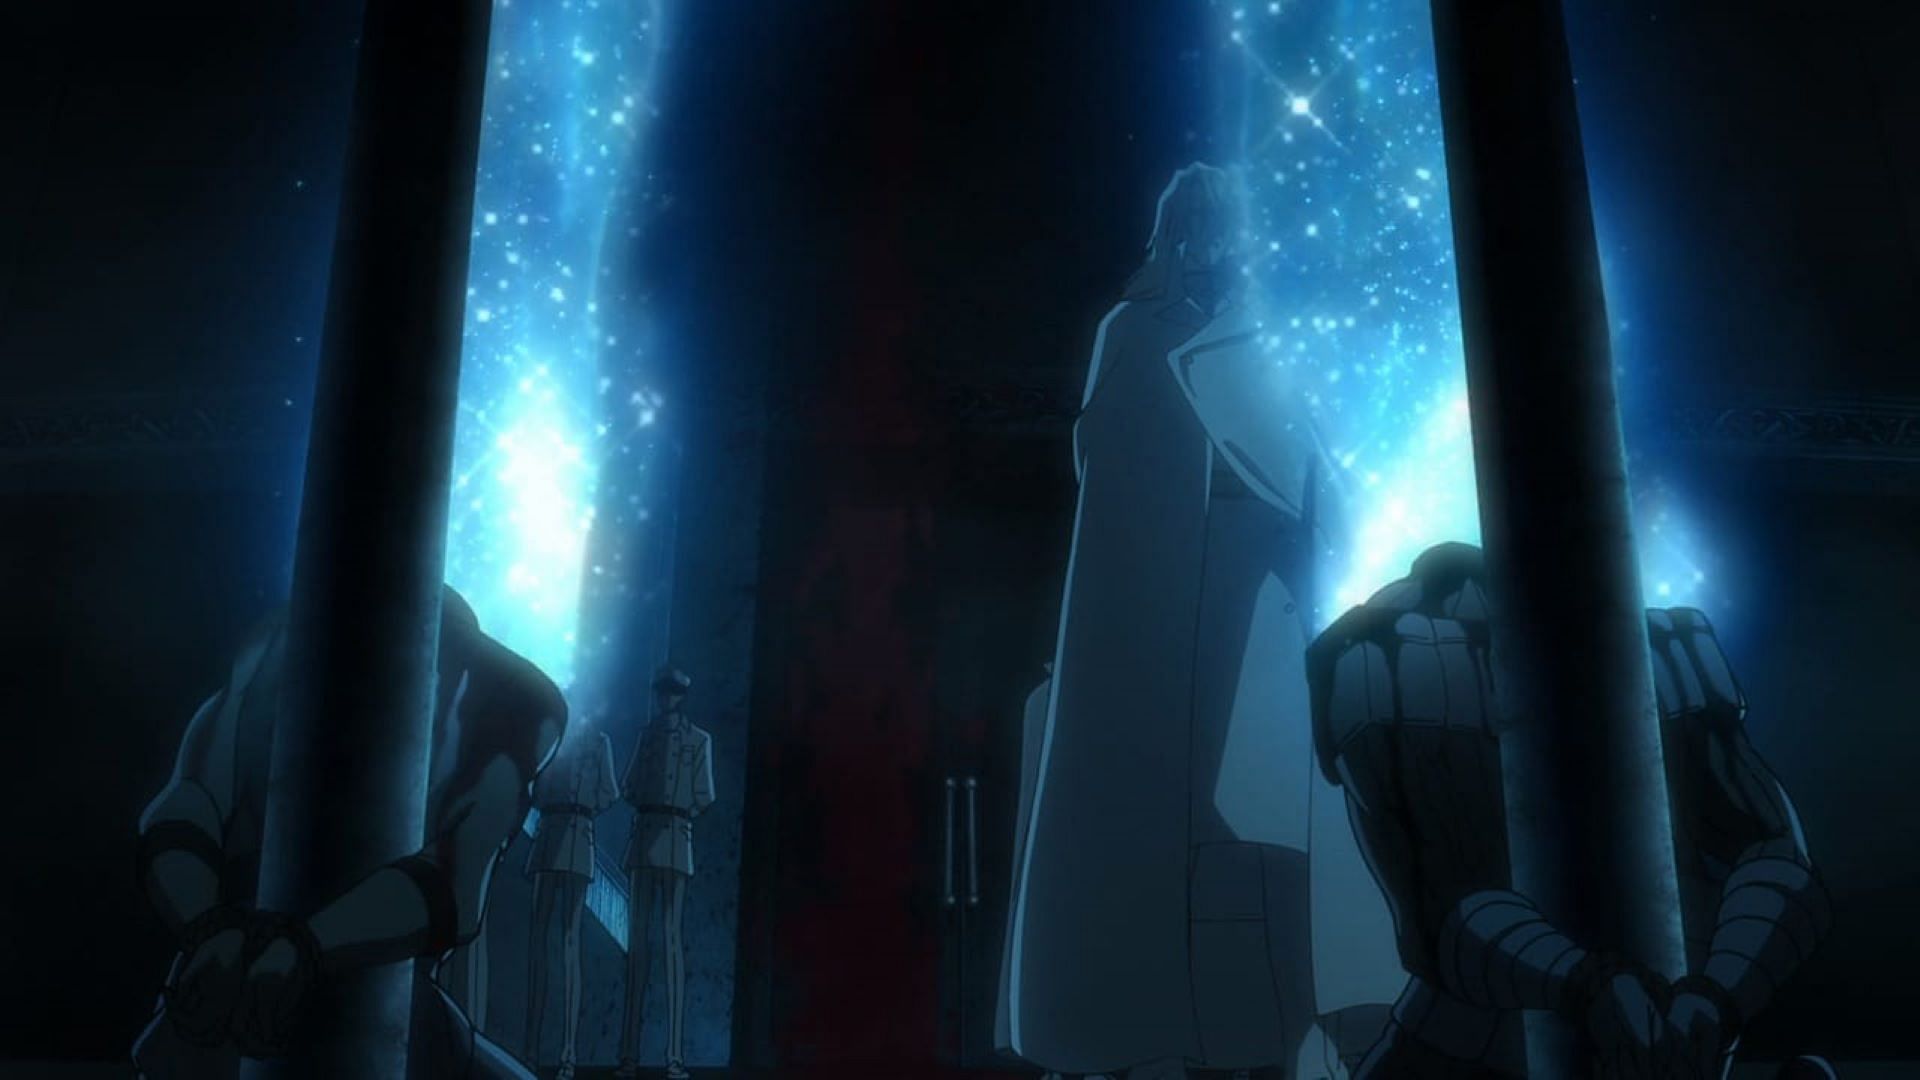 Souls of the Dead Sternritters returning to Yhwach in Bleach TYBW episode 19 (Image via Pierrot)